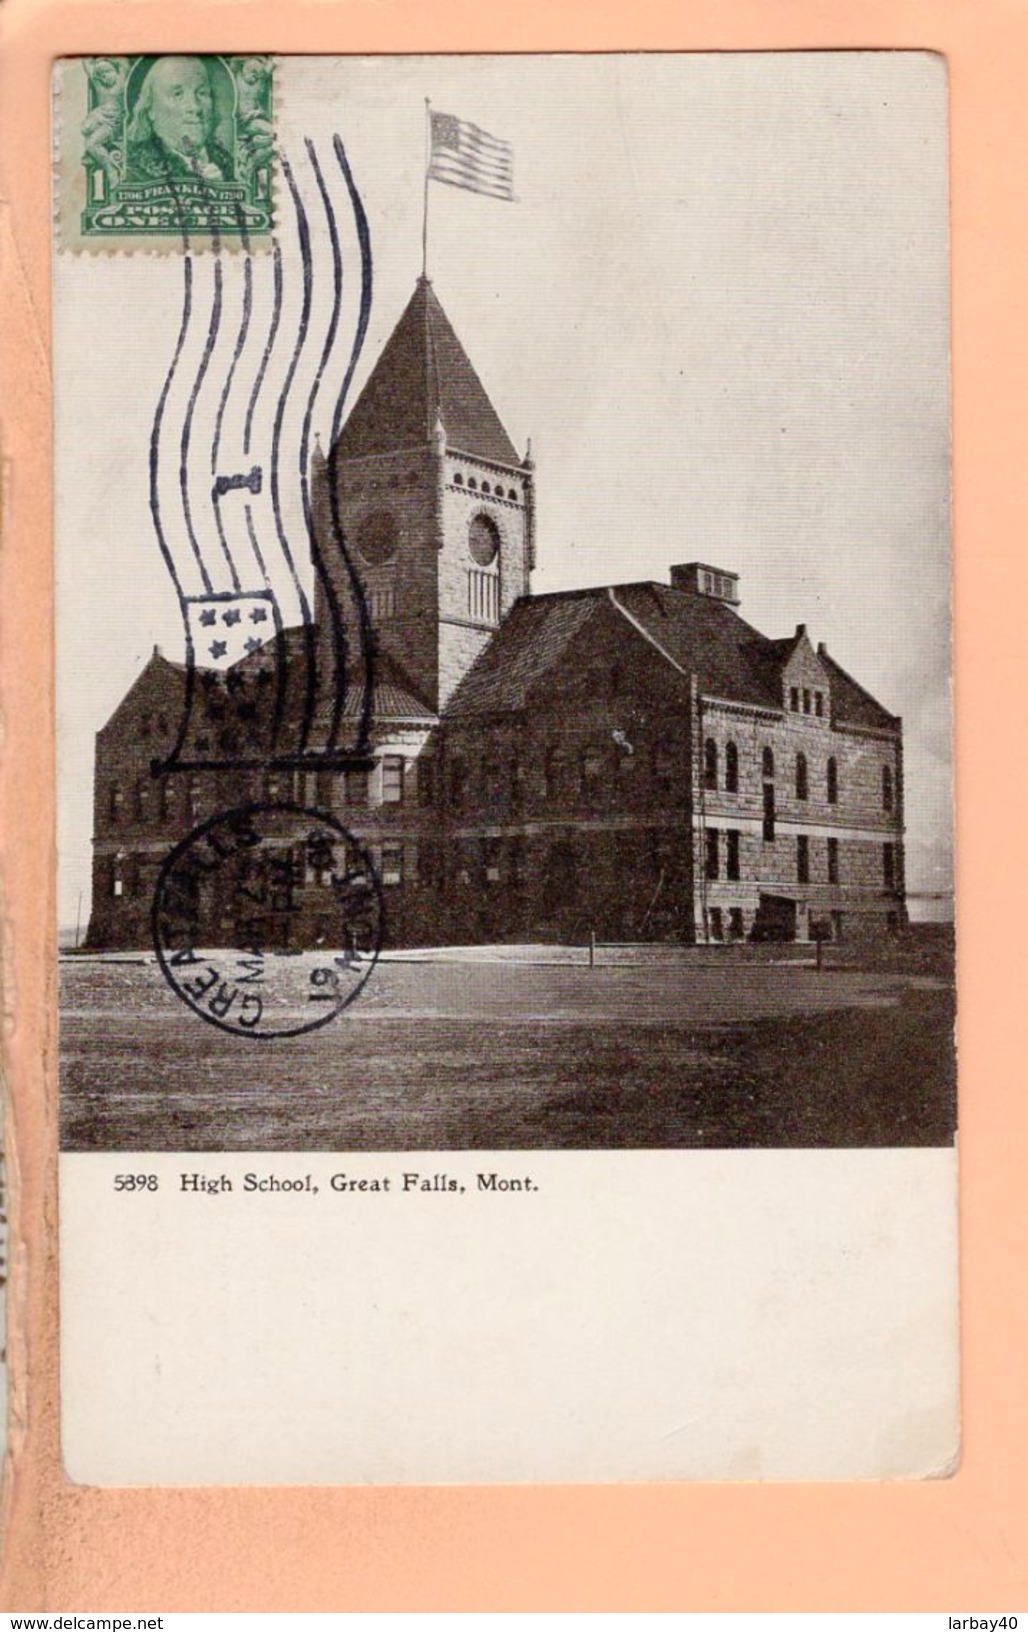 Cpa  Cartes Postales Ancienne - High School Great Falls Mont - Great Falls